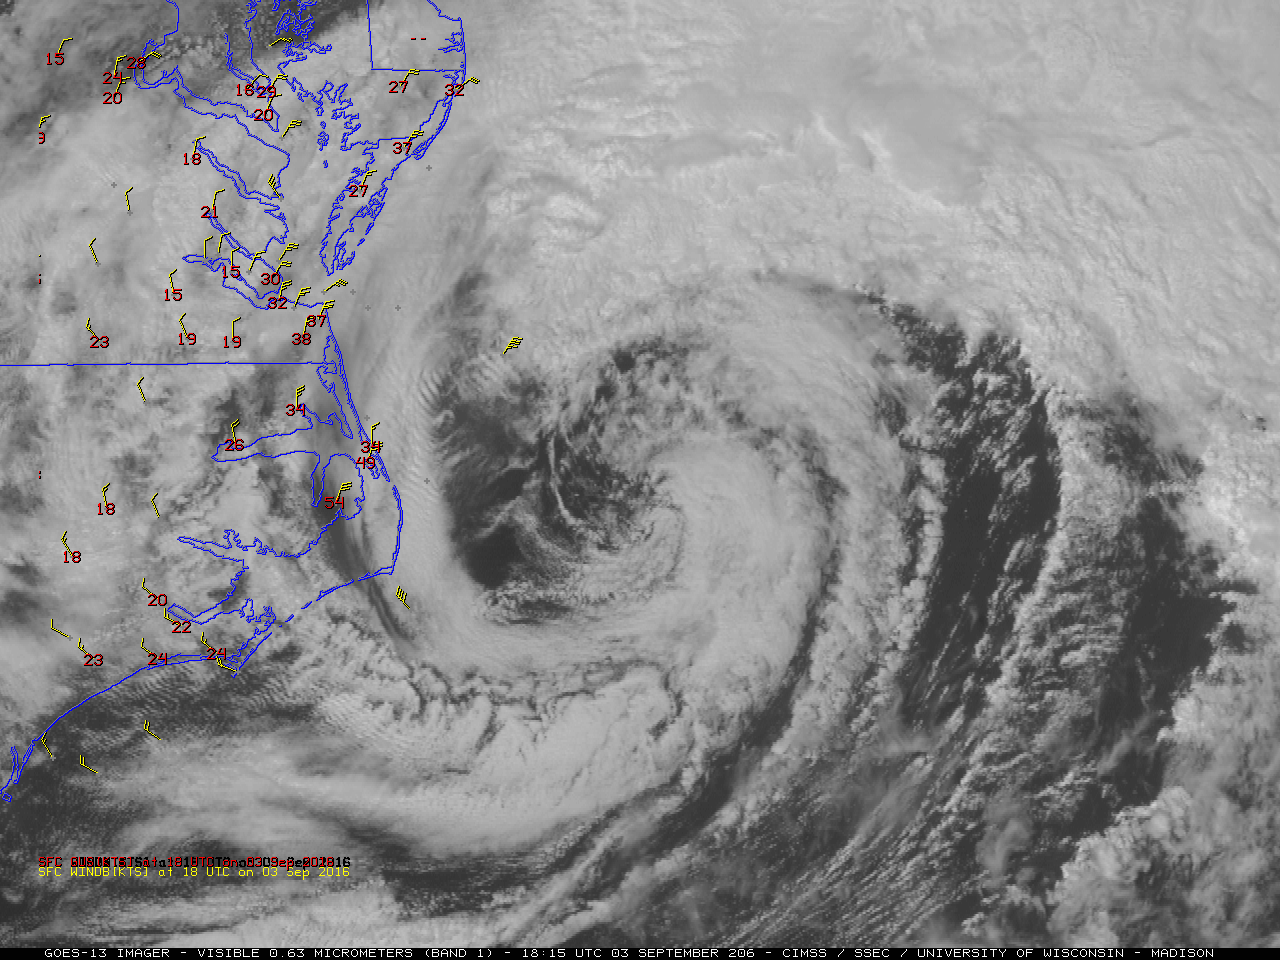 GOES-13 Visible (0.63 µm) images, with surface and buoy wind barbs plotted in yellow and wind gusts (knots) plotted in red [click to play animation]